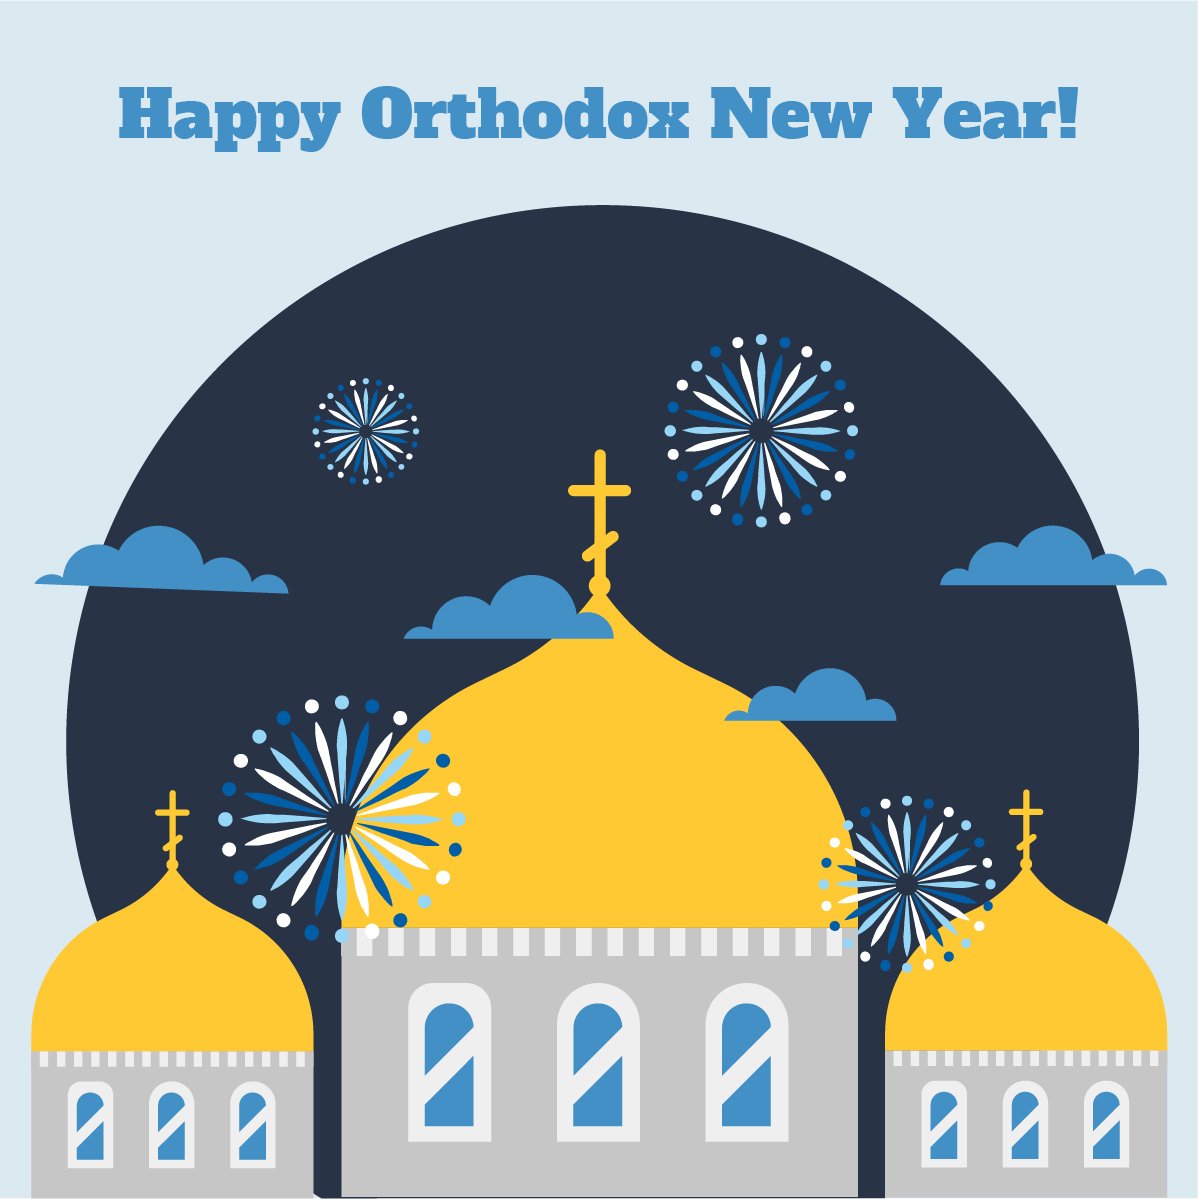 Happy Orthodox New Year Vector in EPS, Illustrator, JPG, PSD, PNG, SVG